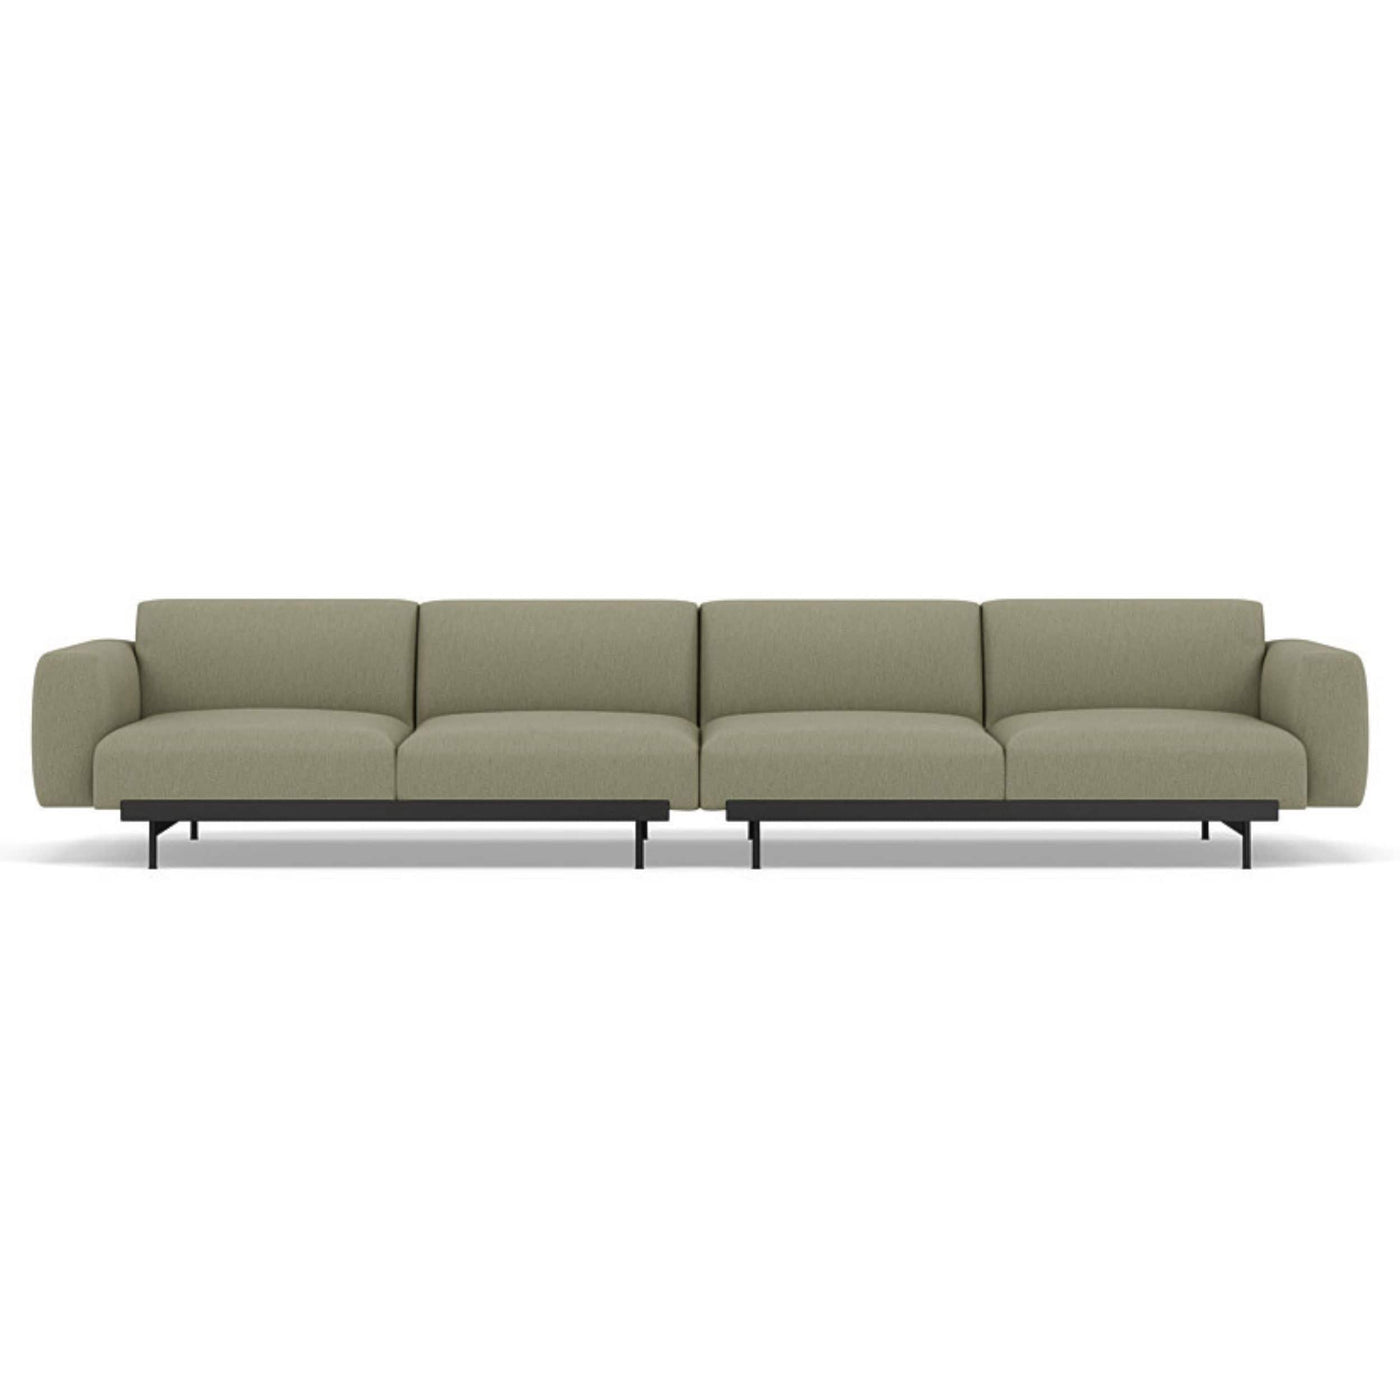 Muuto In Situ Modular 4 Seater Sofa configuration 1 in clay 15. Made to order from someday designs. #colour_clay-15